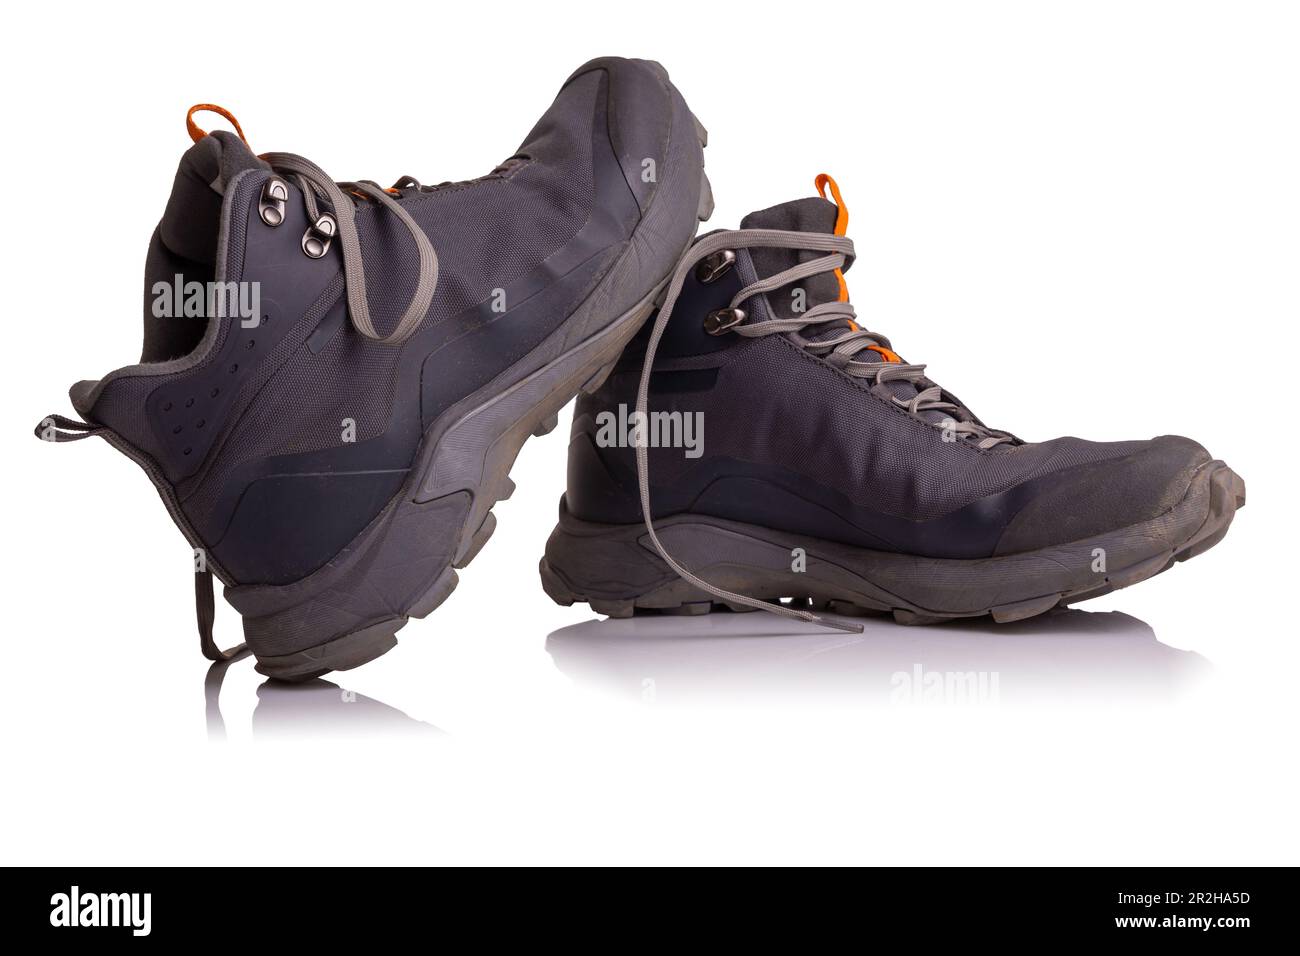 Pair of gray hiking boots,isolate on a white background. Stock Photo